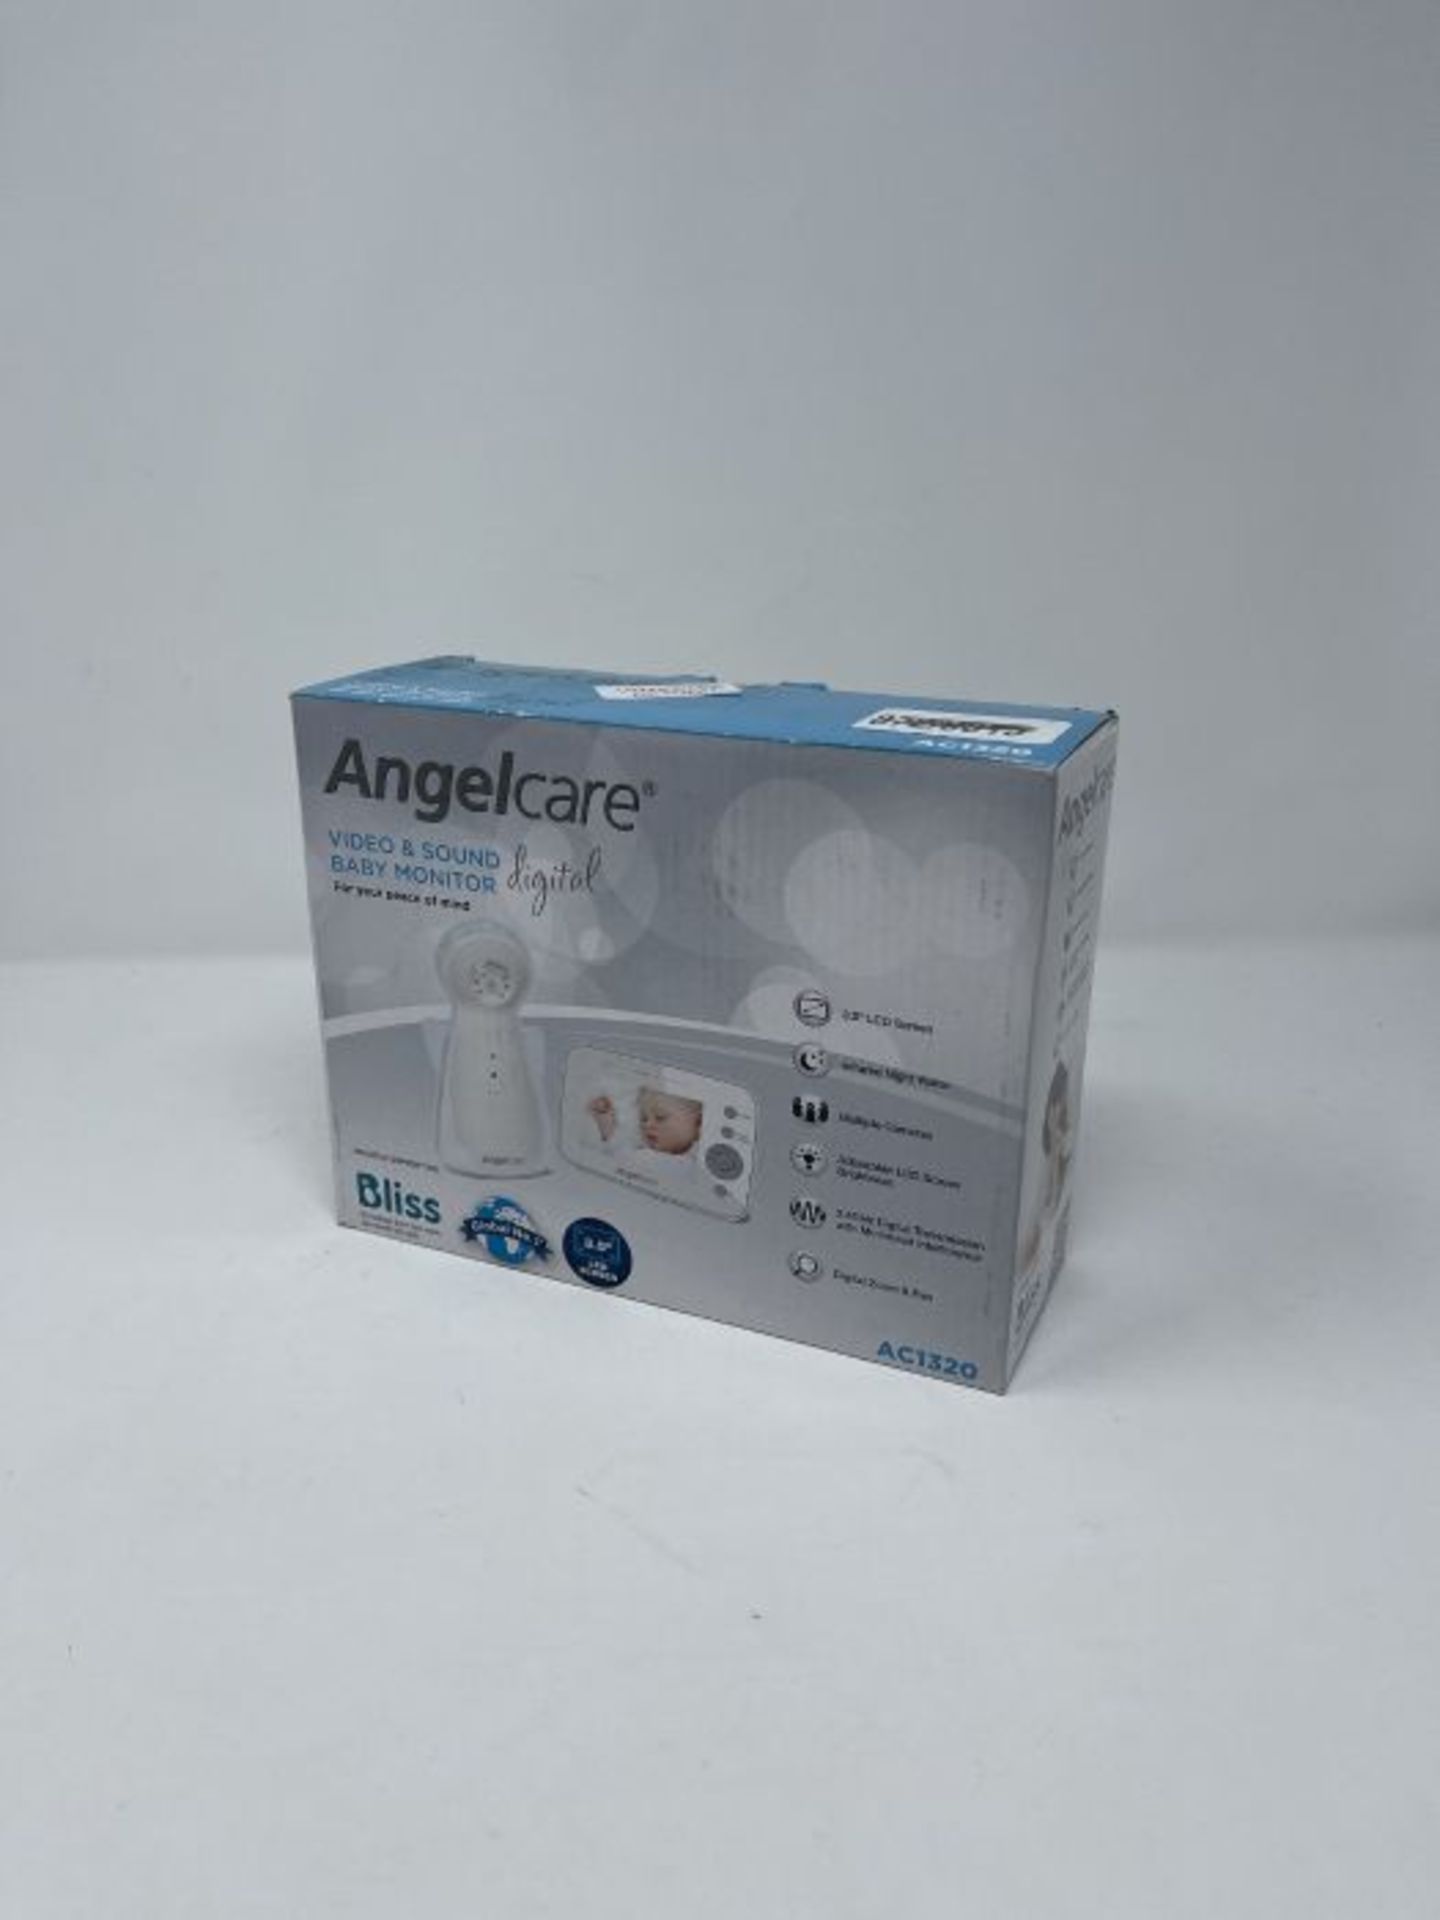 RRP £109.00 ANGELCARE AC1320 DIGITAL VIDEO MONITOR - Image 2 of 3